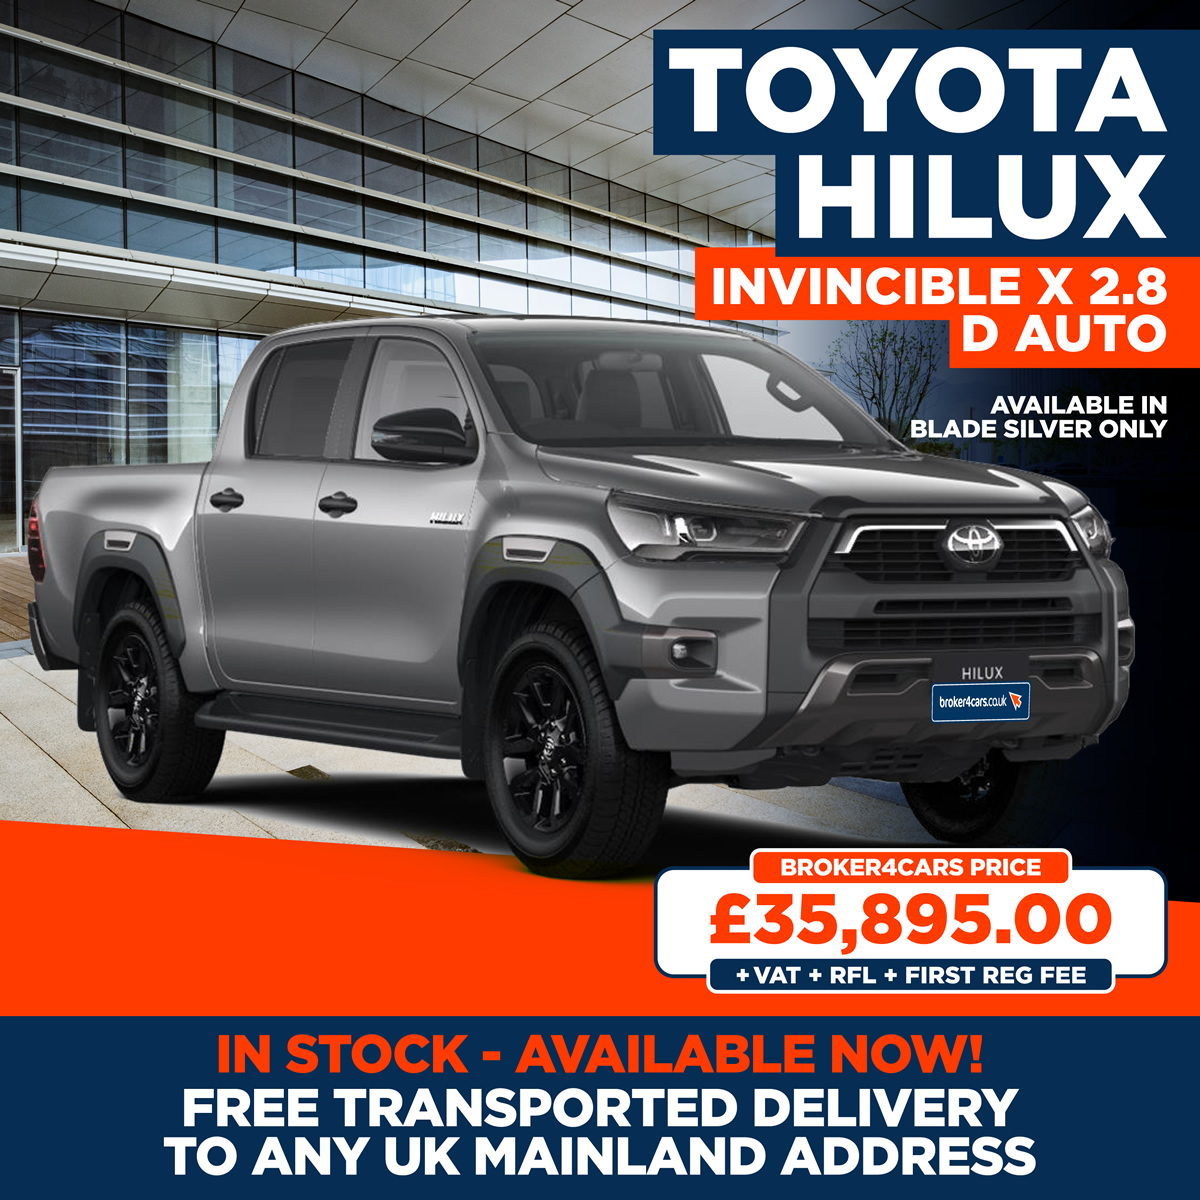 Toyota Hilux Invincible X 2.8 D Auto. Available in Blade Silver only. In stock - available now. Free transported delivery to any uk mainland address. Broker4Cars Price £35,895 OTR